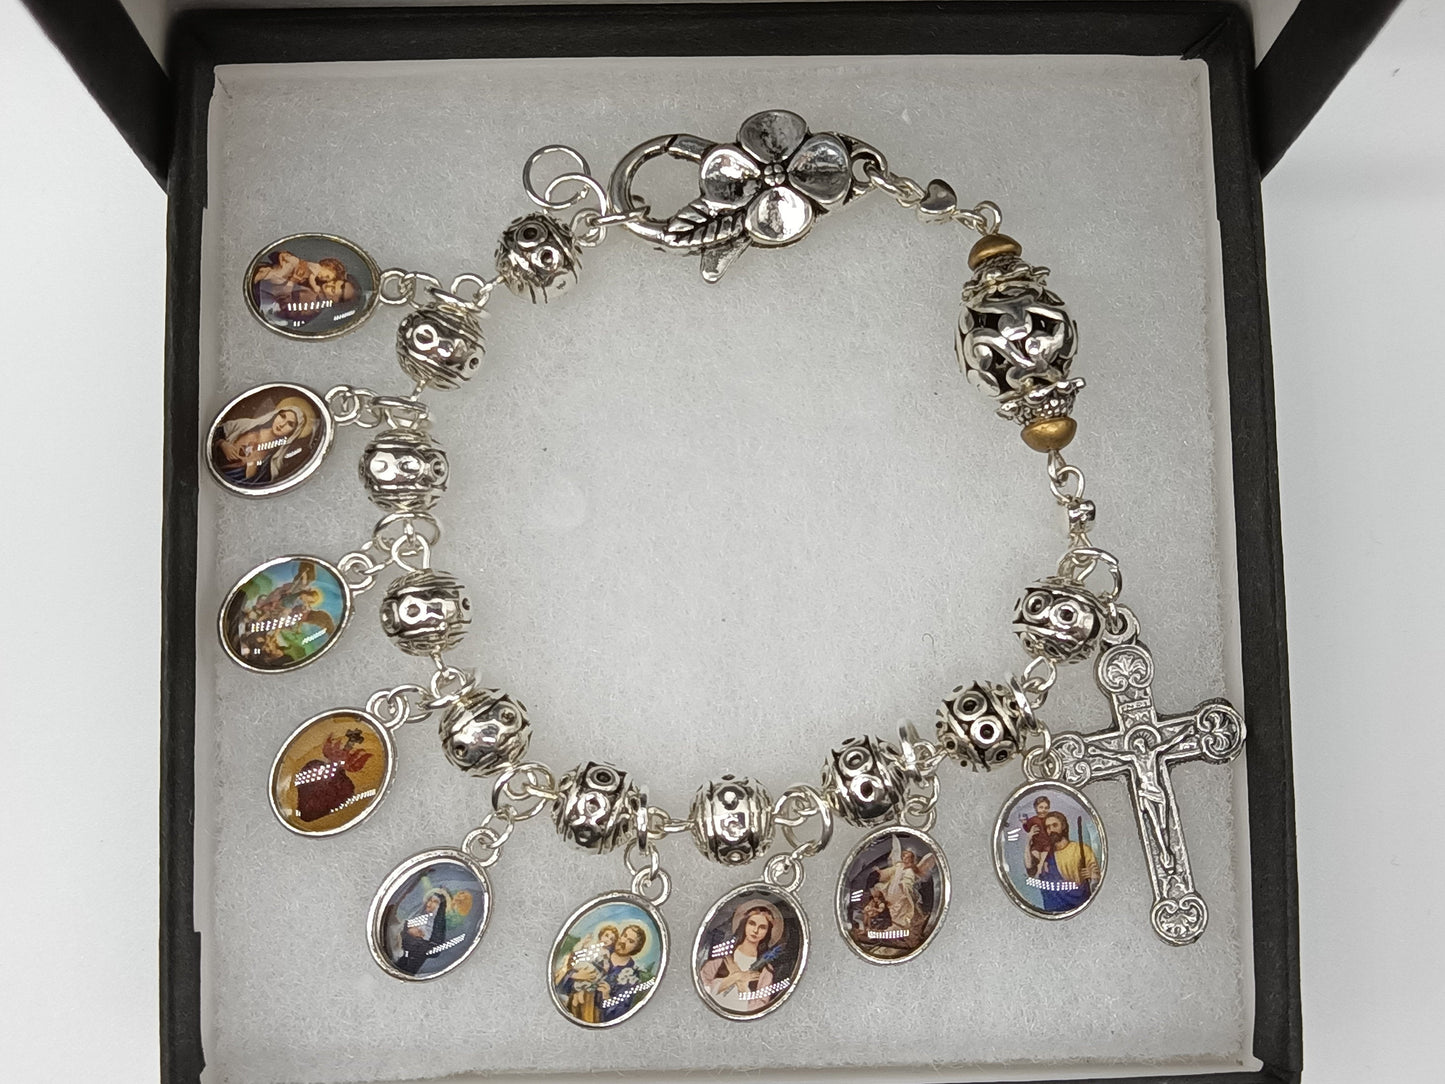 Religious medal Tibetan silver single decade rosary bracelet, Miraculous medal Rosary Bracelet, Crucifix, Jewellery gift, Religious medals.